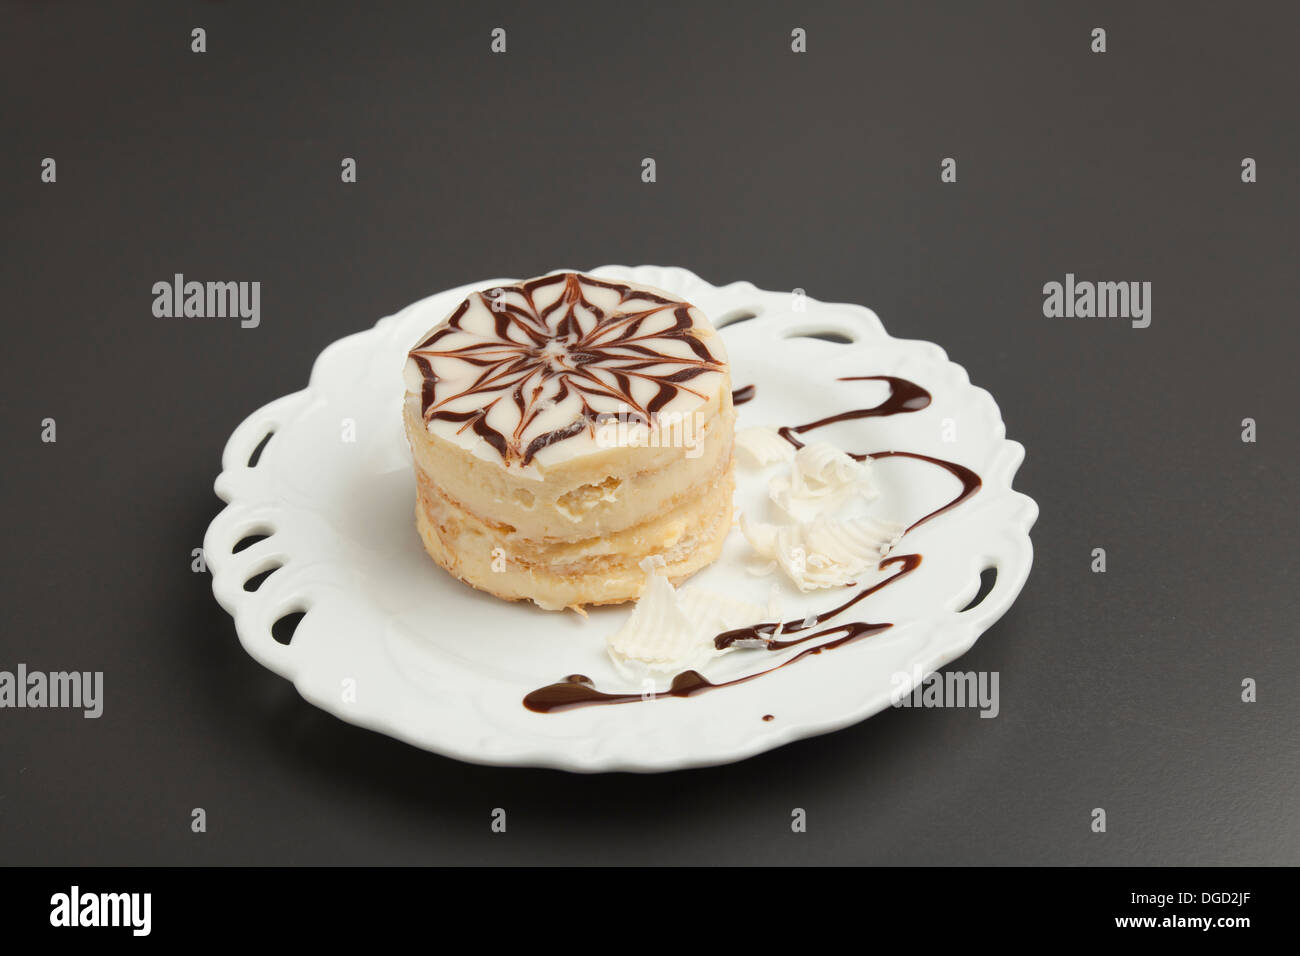 cake on the white plate with decoration Stock Photo